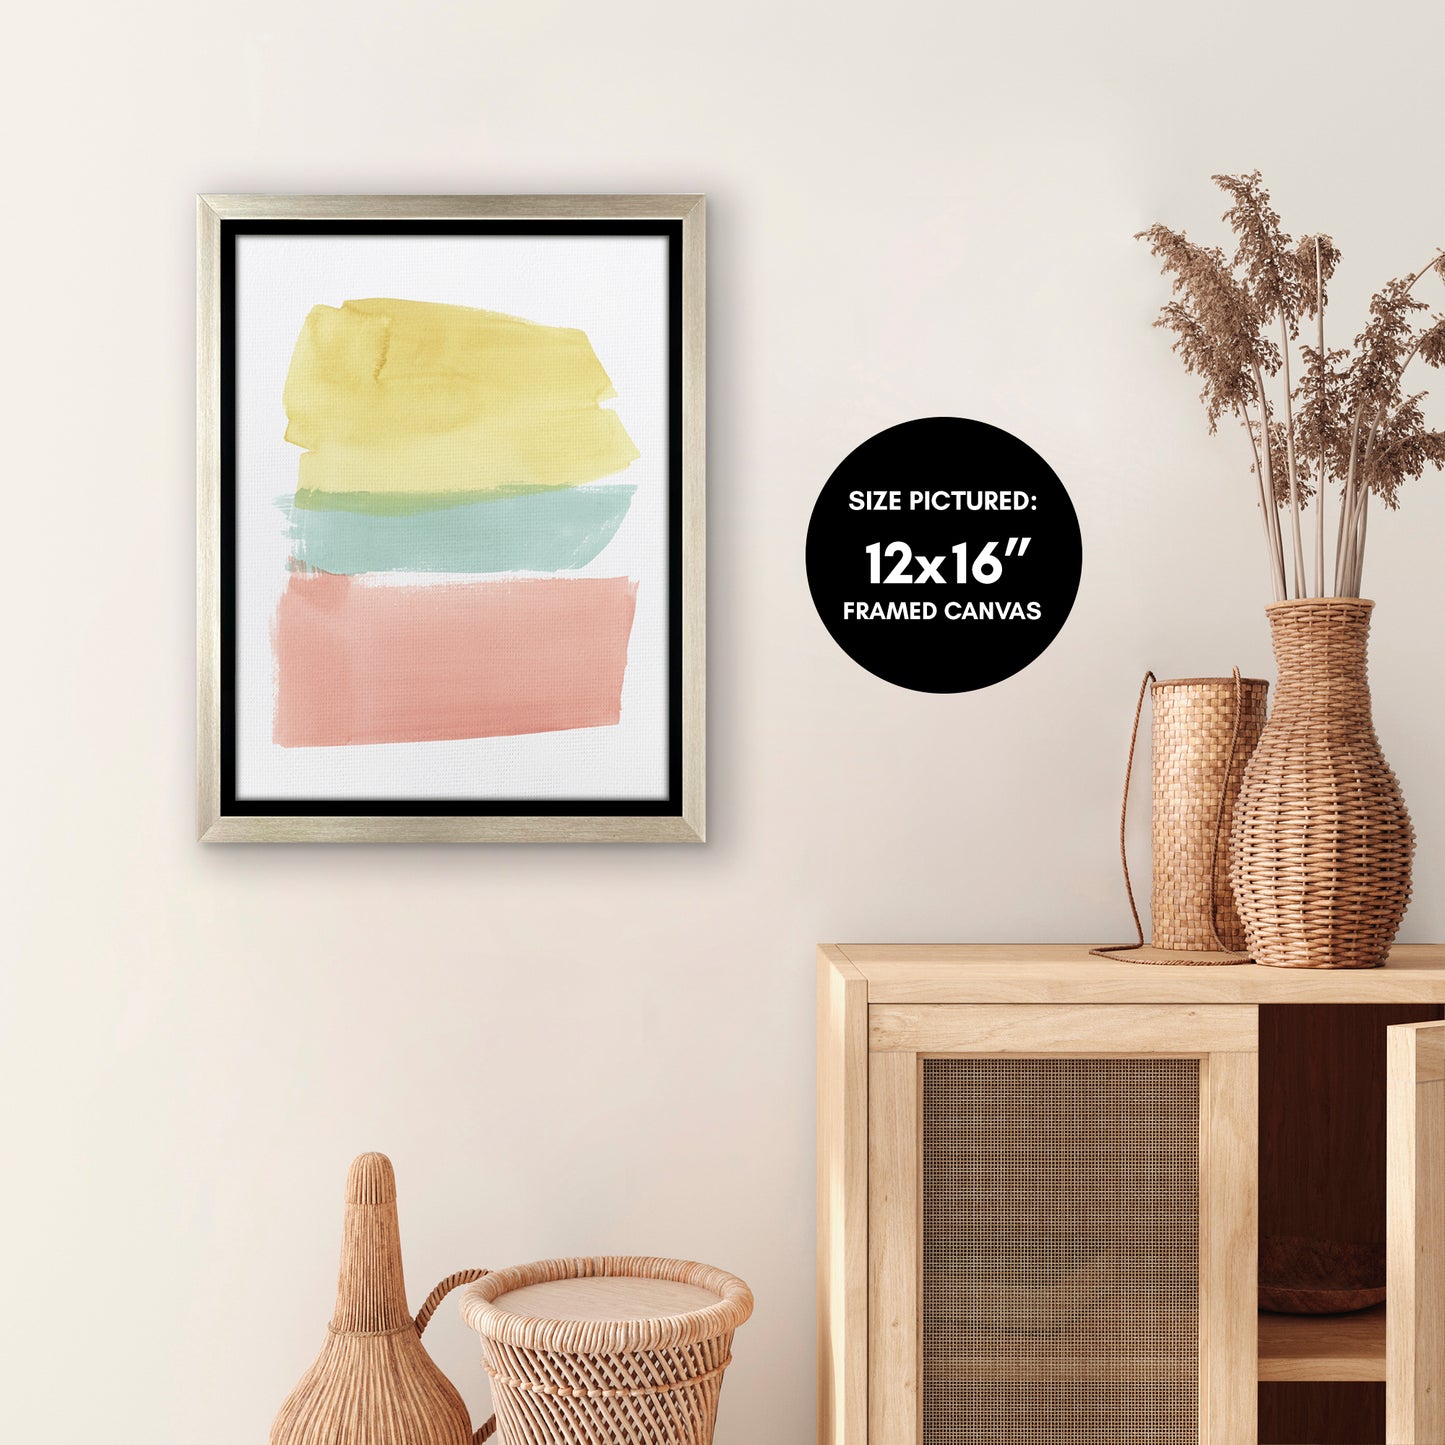 Delectable I by PI Creative Art Modern Wall Art Decor - Floating